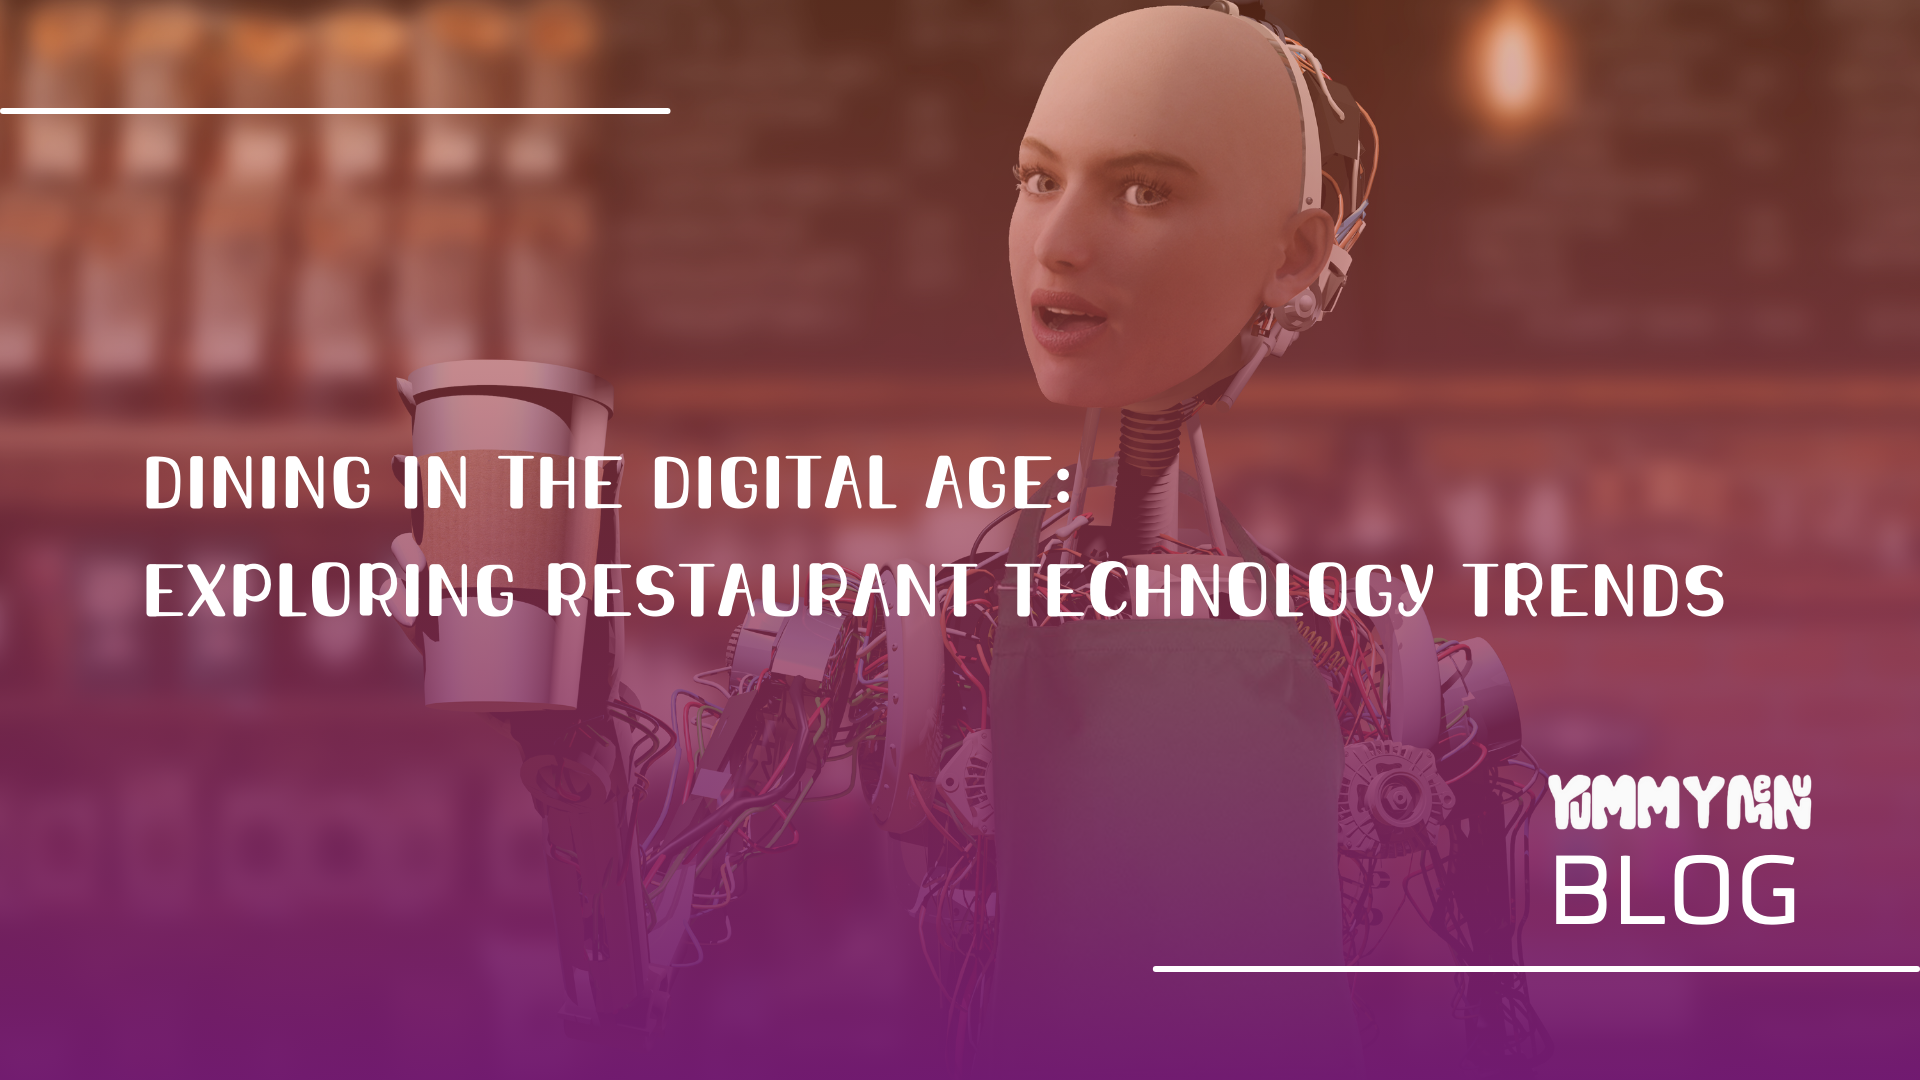 Dining in the Digital Age: Exploring Restaurant Technology Trends